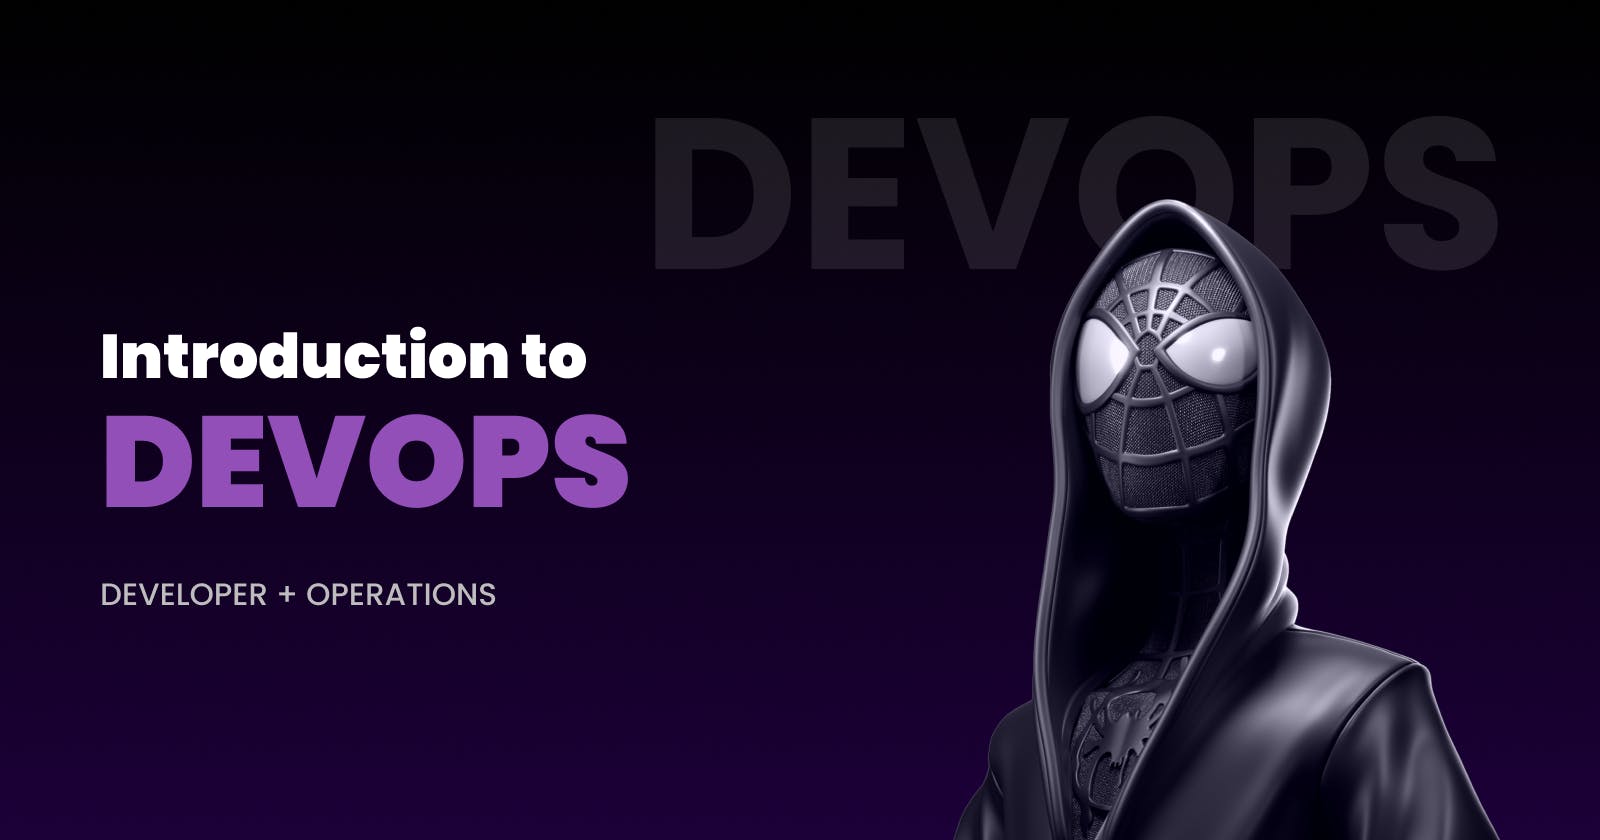 DevOps: Bridging the Gap Between Development and Operations for Agile Software Delivery